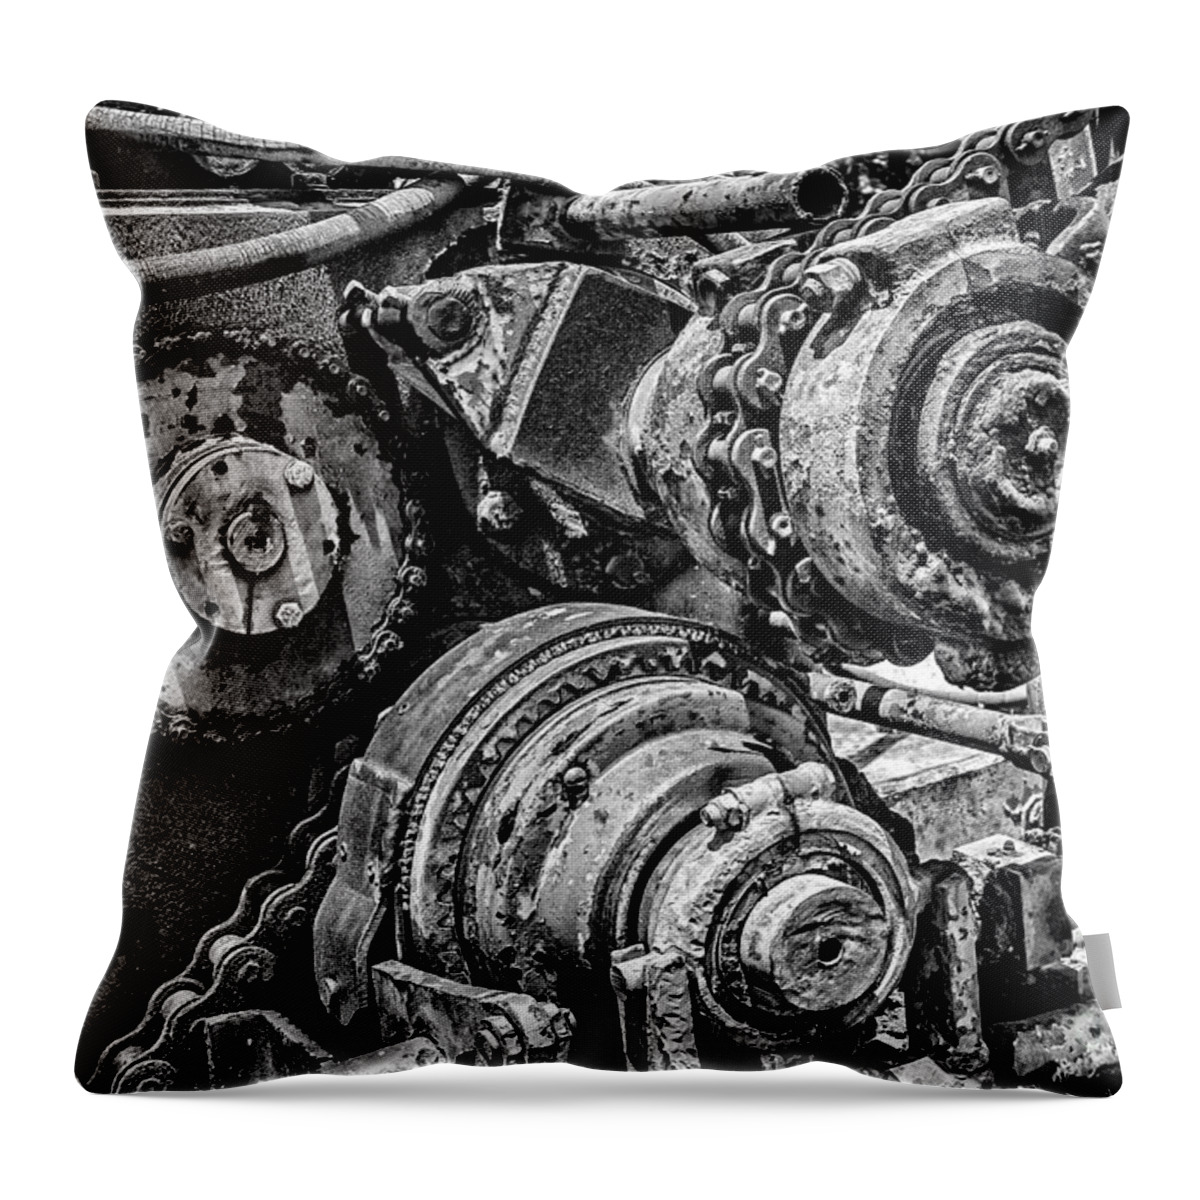 Work Throw Pillow featuring the photograph Yesterday's Work by Tamyra Ayles